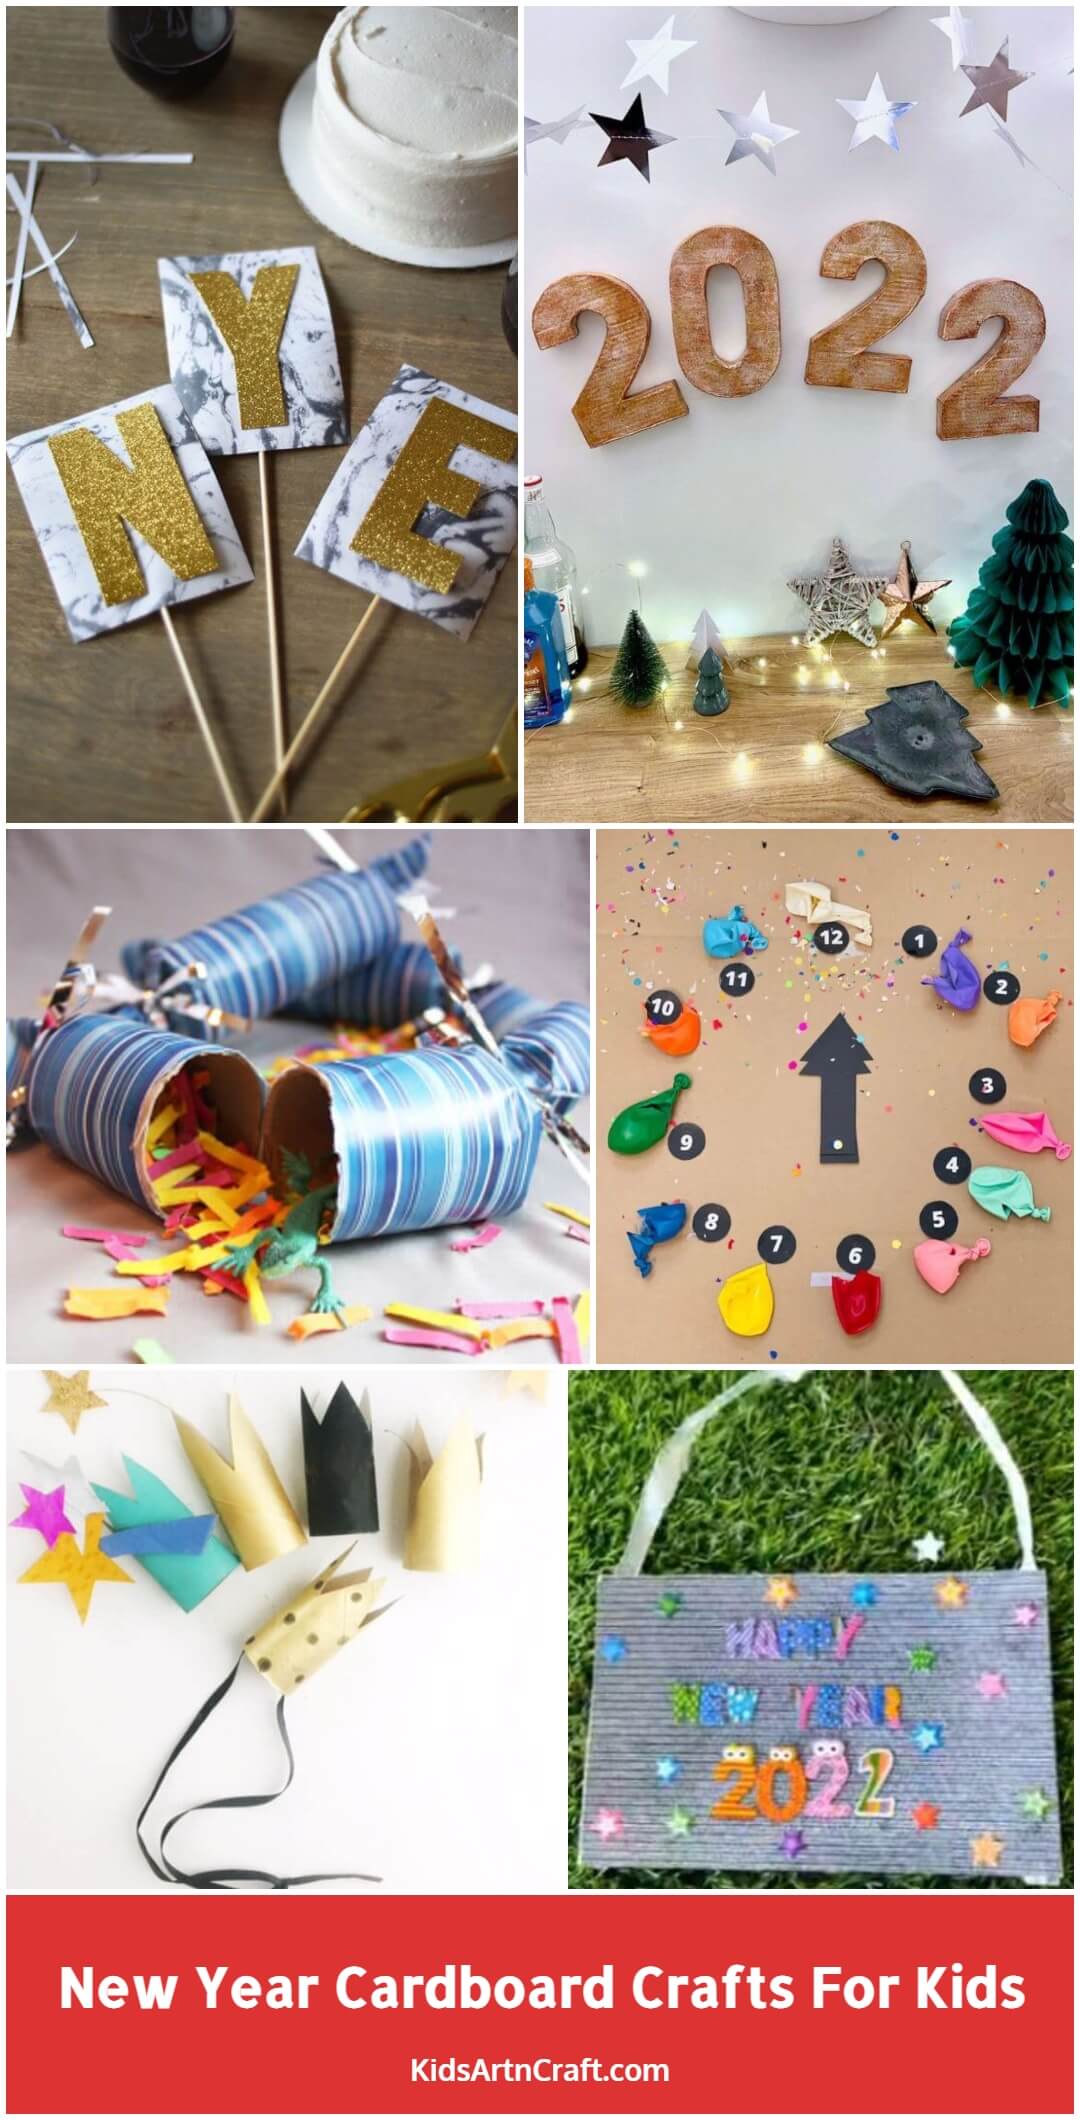 New Year Cardboard Crafts for Kids